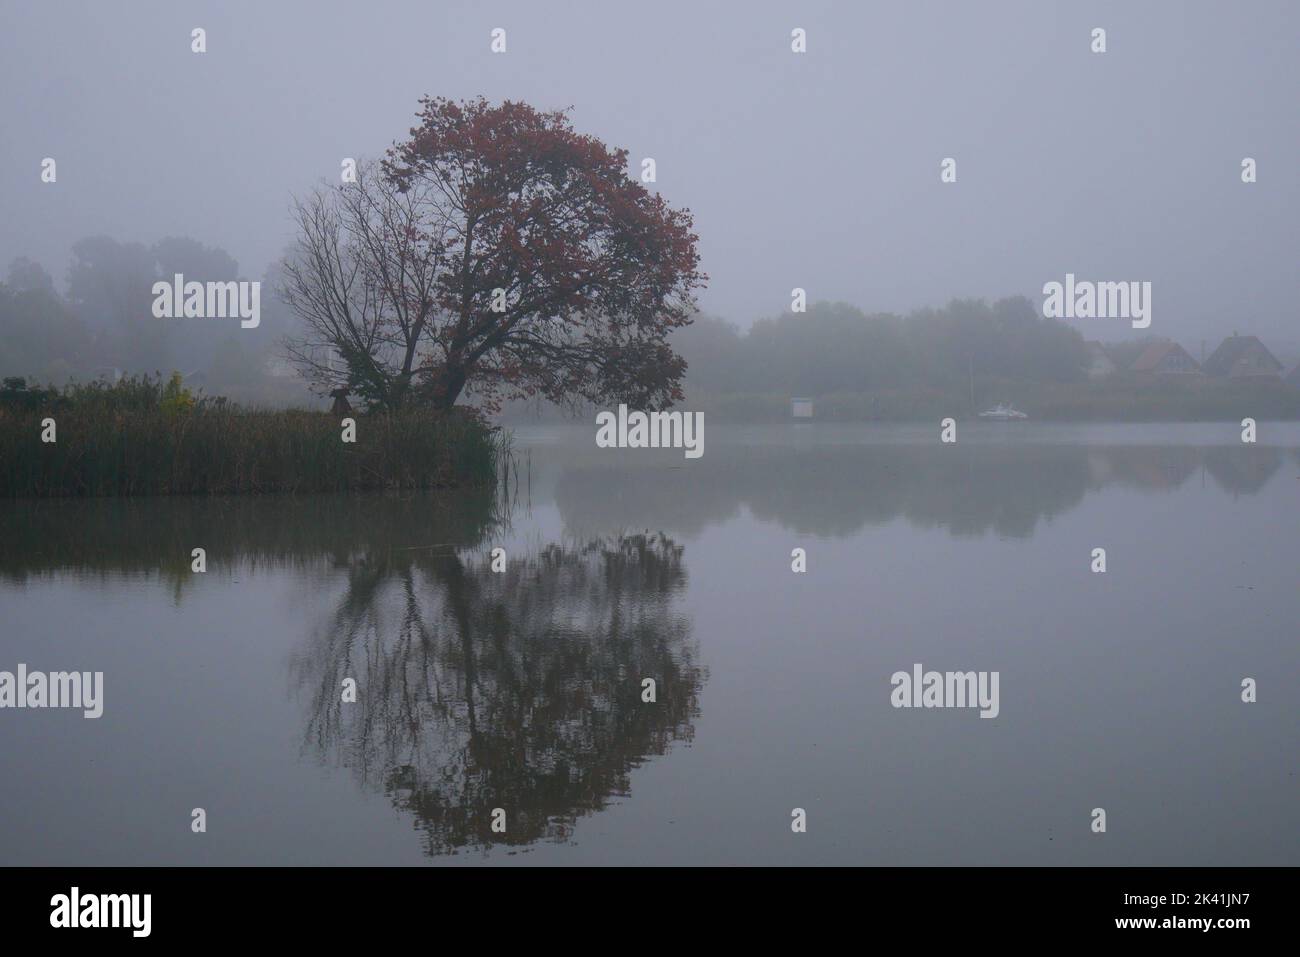 Early morning fog on a cold autumn day on the River Danube, Szigethalom, Hungary Stock Photo